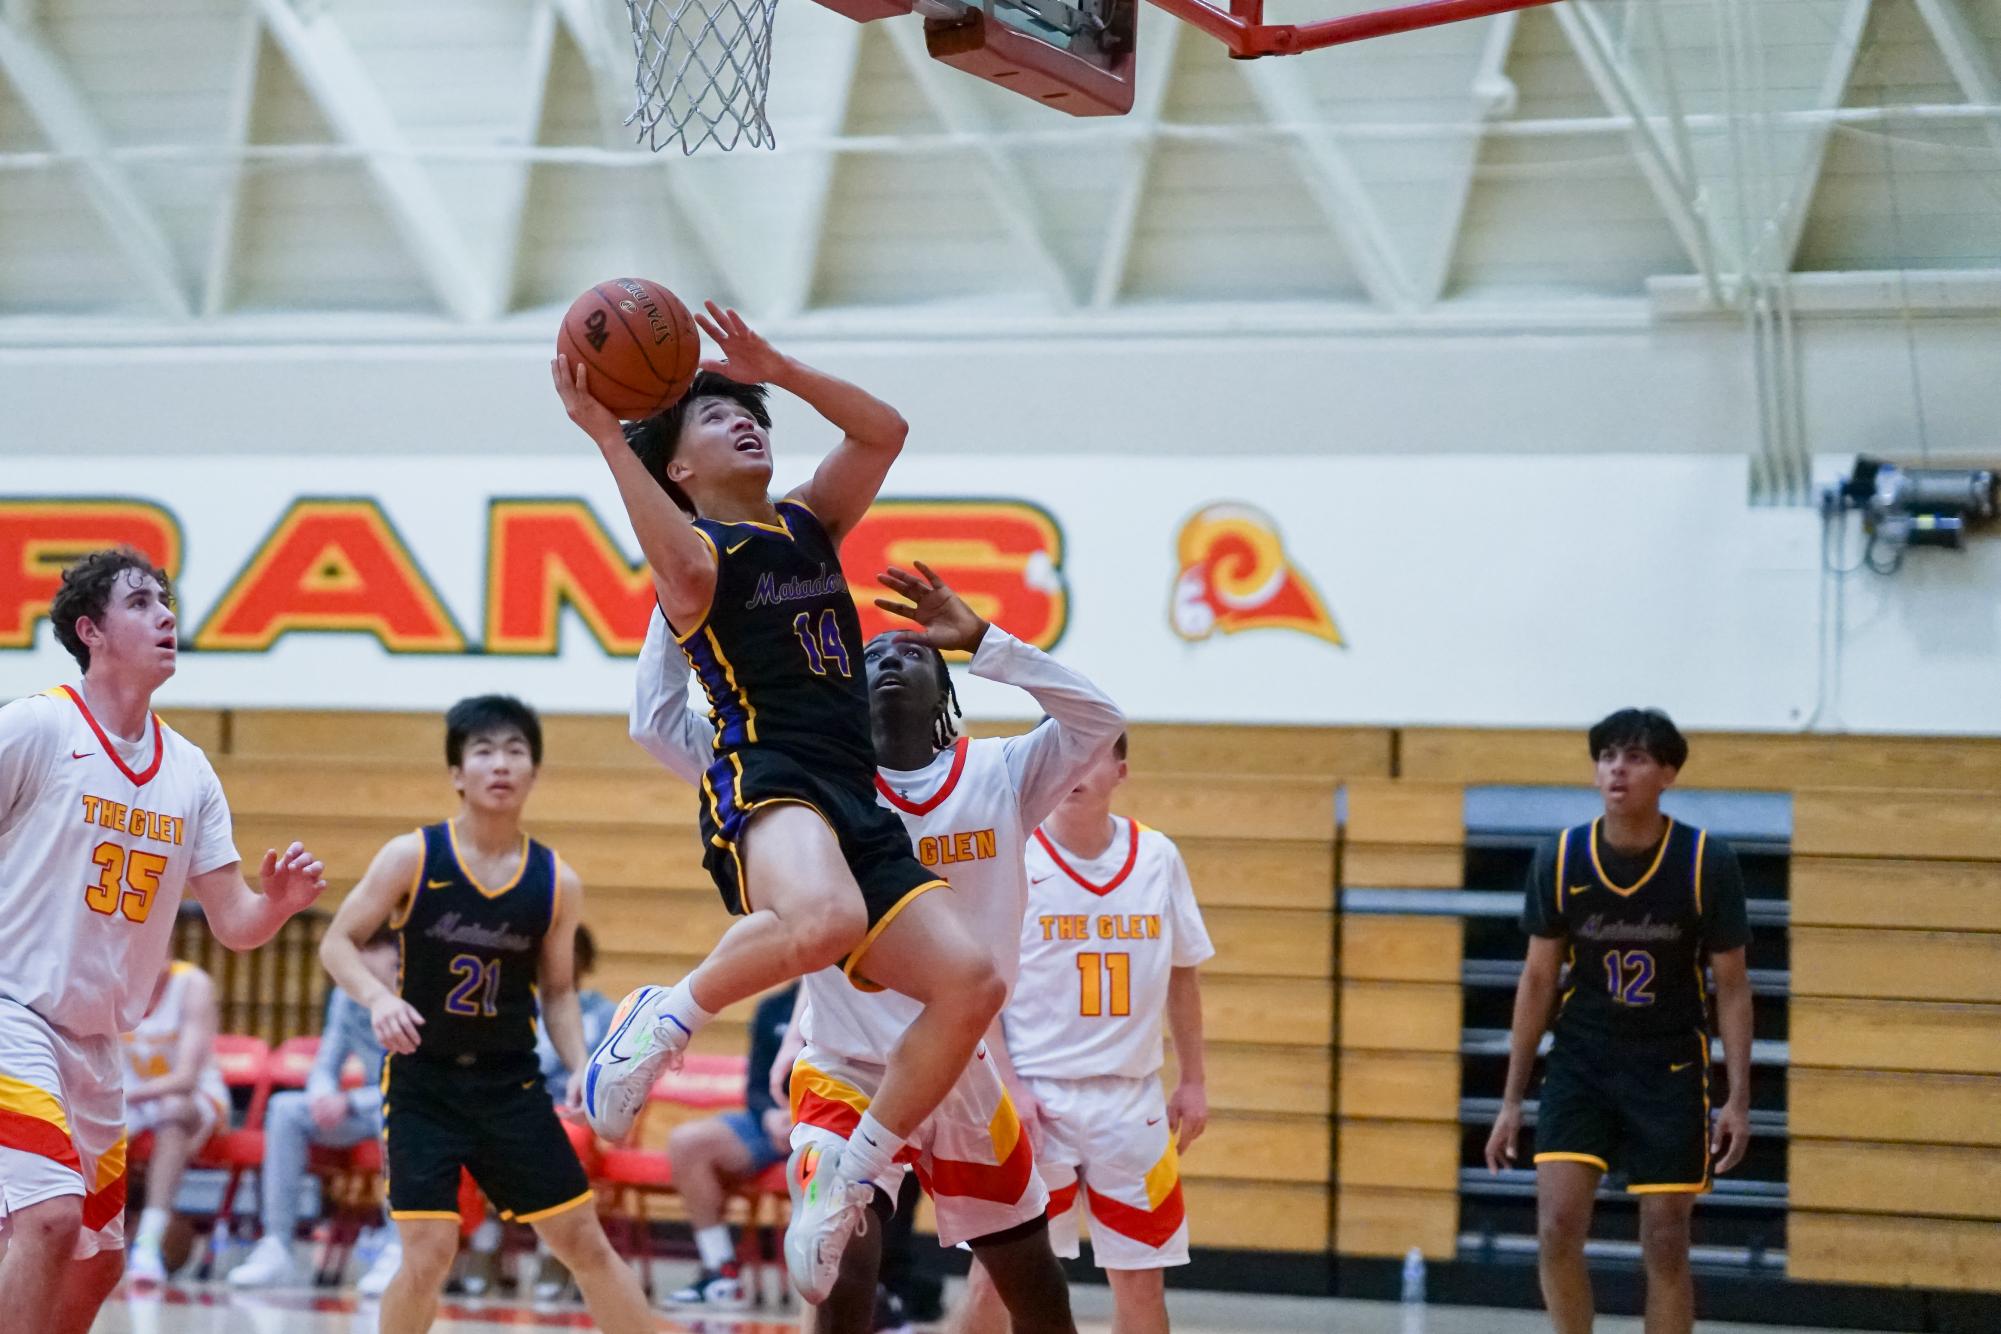 Senior and point guard Matthew Lau jumps to score the ball over a defender.

